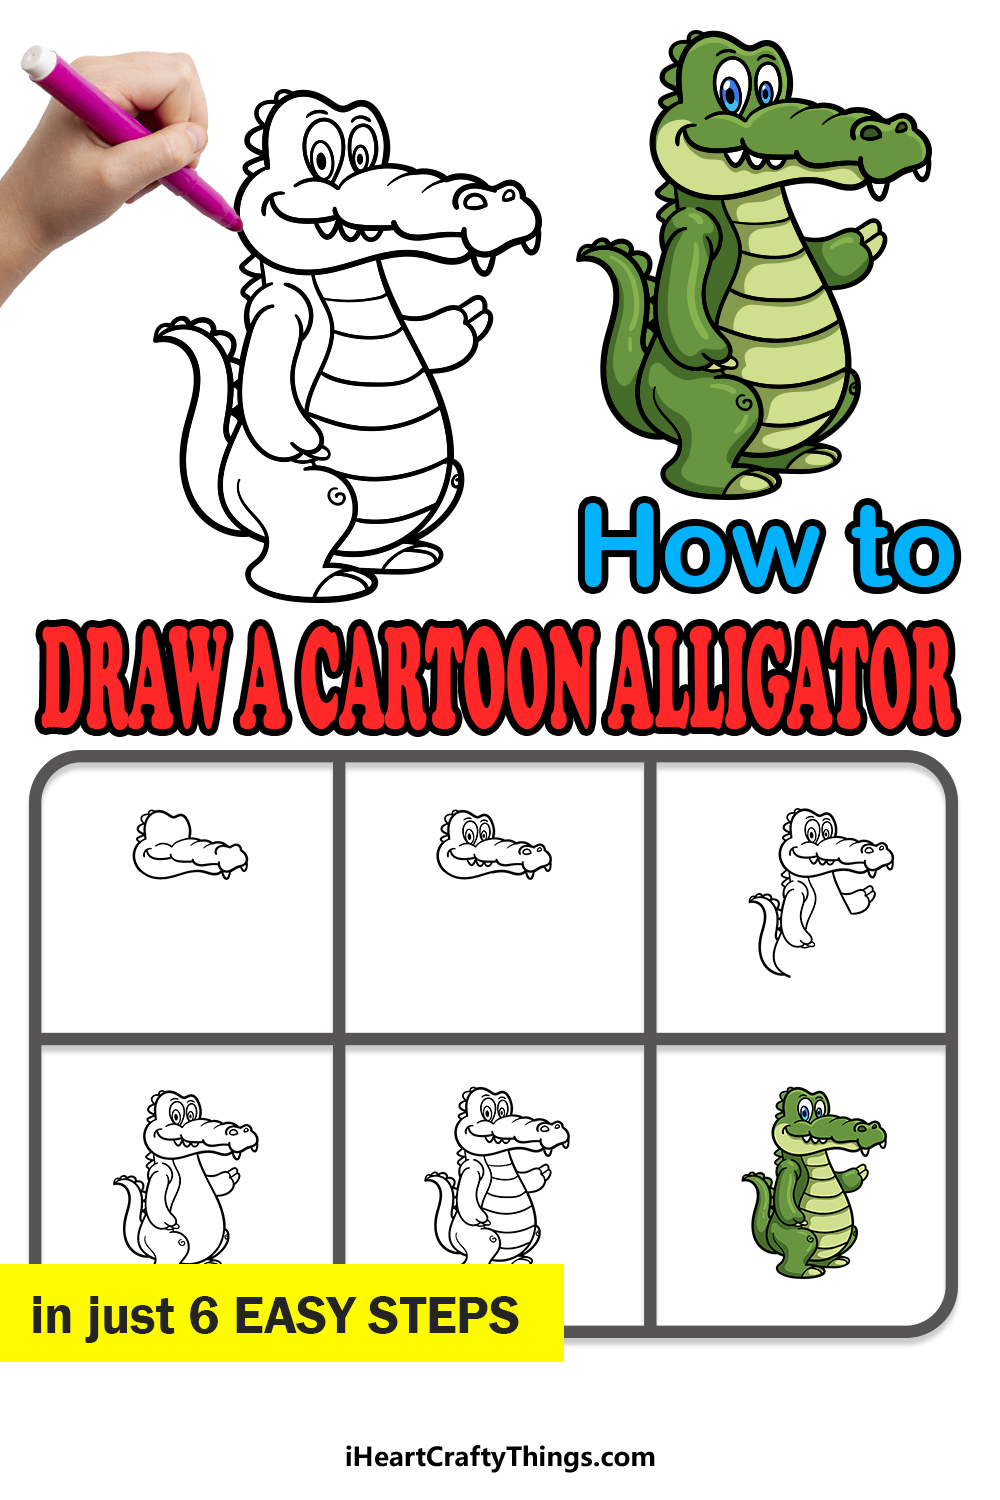 how to draw a Cartoon Alligator in 6 easy steps